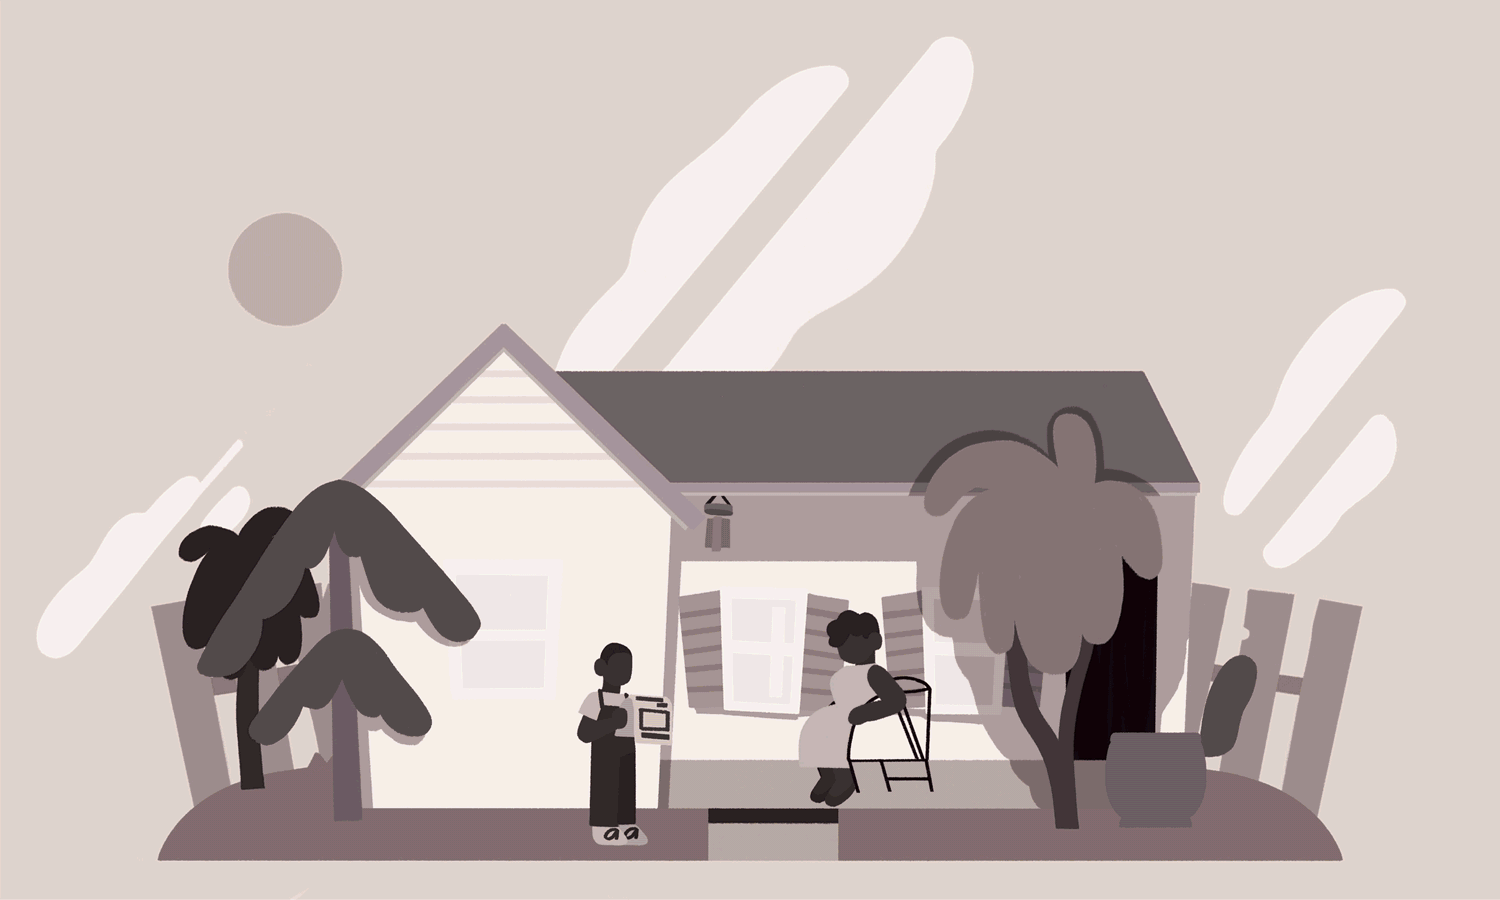 An animated illustration portraying Fred, a Black man, throughout three stages of his life in front of his childhood home. His childhood is black and white, with him as a boy reading the newspaper and his mother is sitting on the porch. His adulthood in Sepia with him standing tall and proud, and the porch seat is empty. The final frame showing him in the present as an old man looking to the future. The vegetation and garden of the house grow with him, starting from minimal to lush foliage.